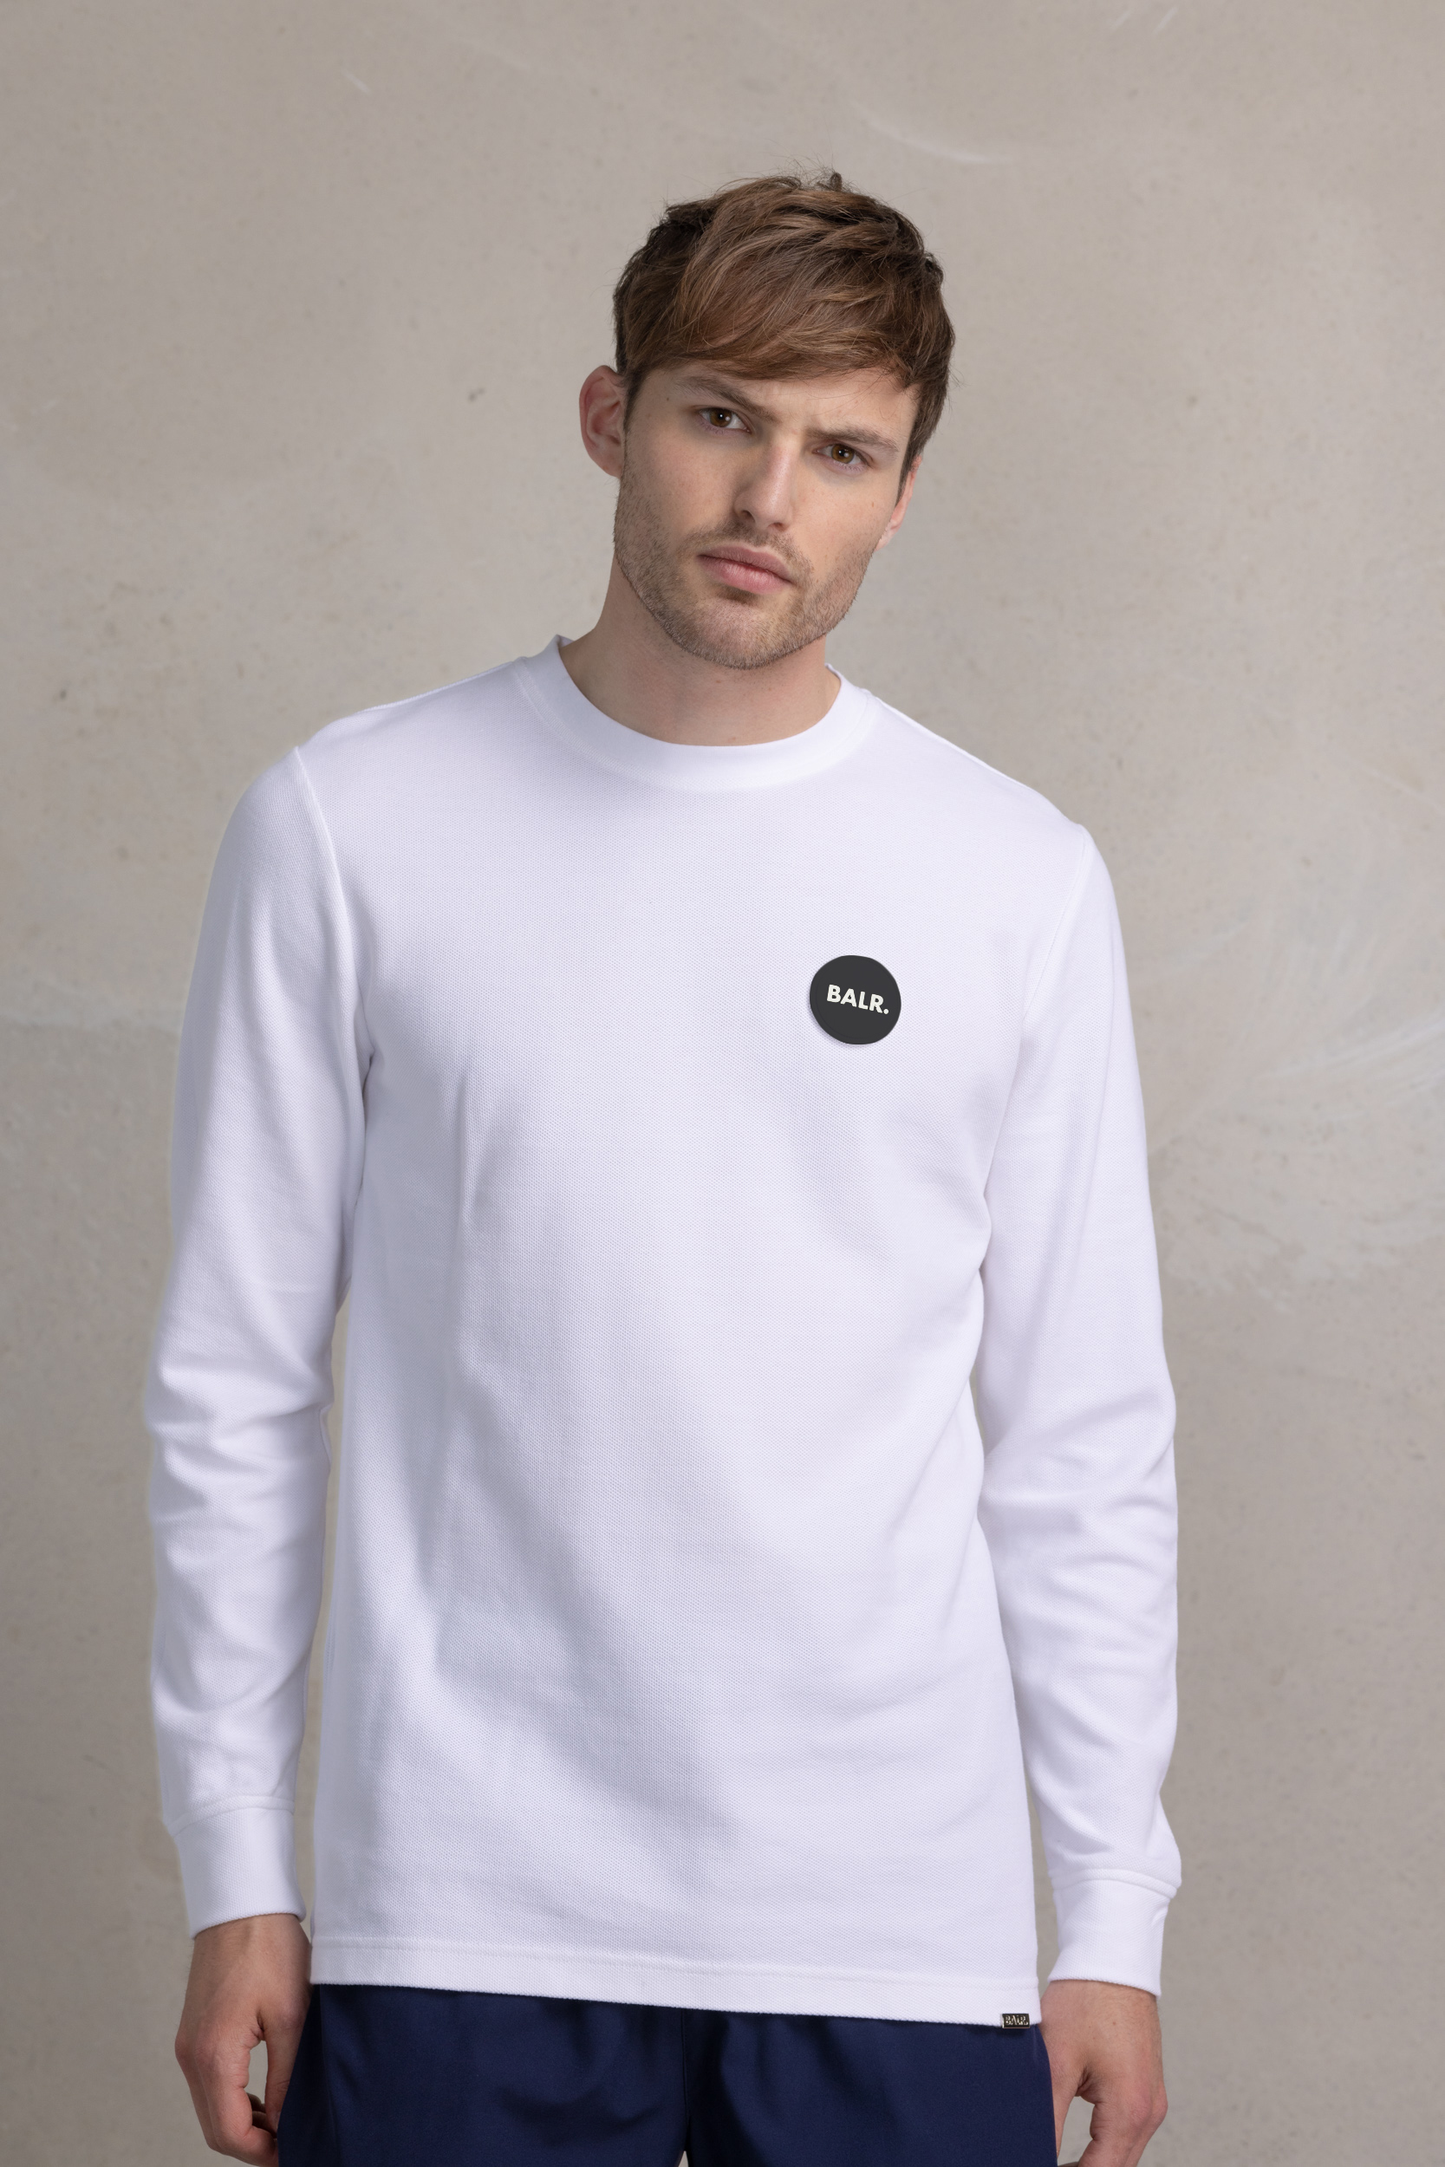 Olaf Straight Round Rubber Badge Longsleeve Bright White